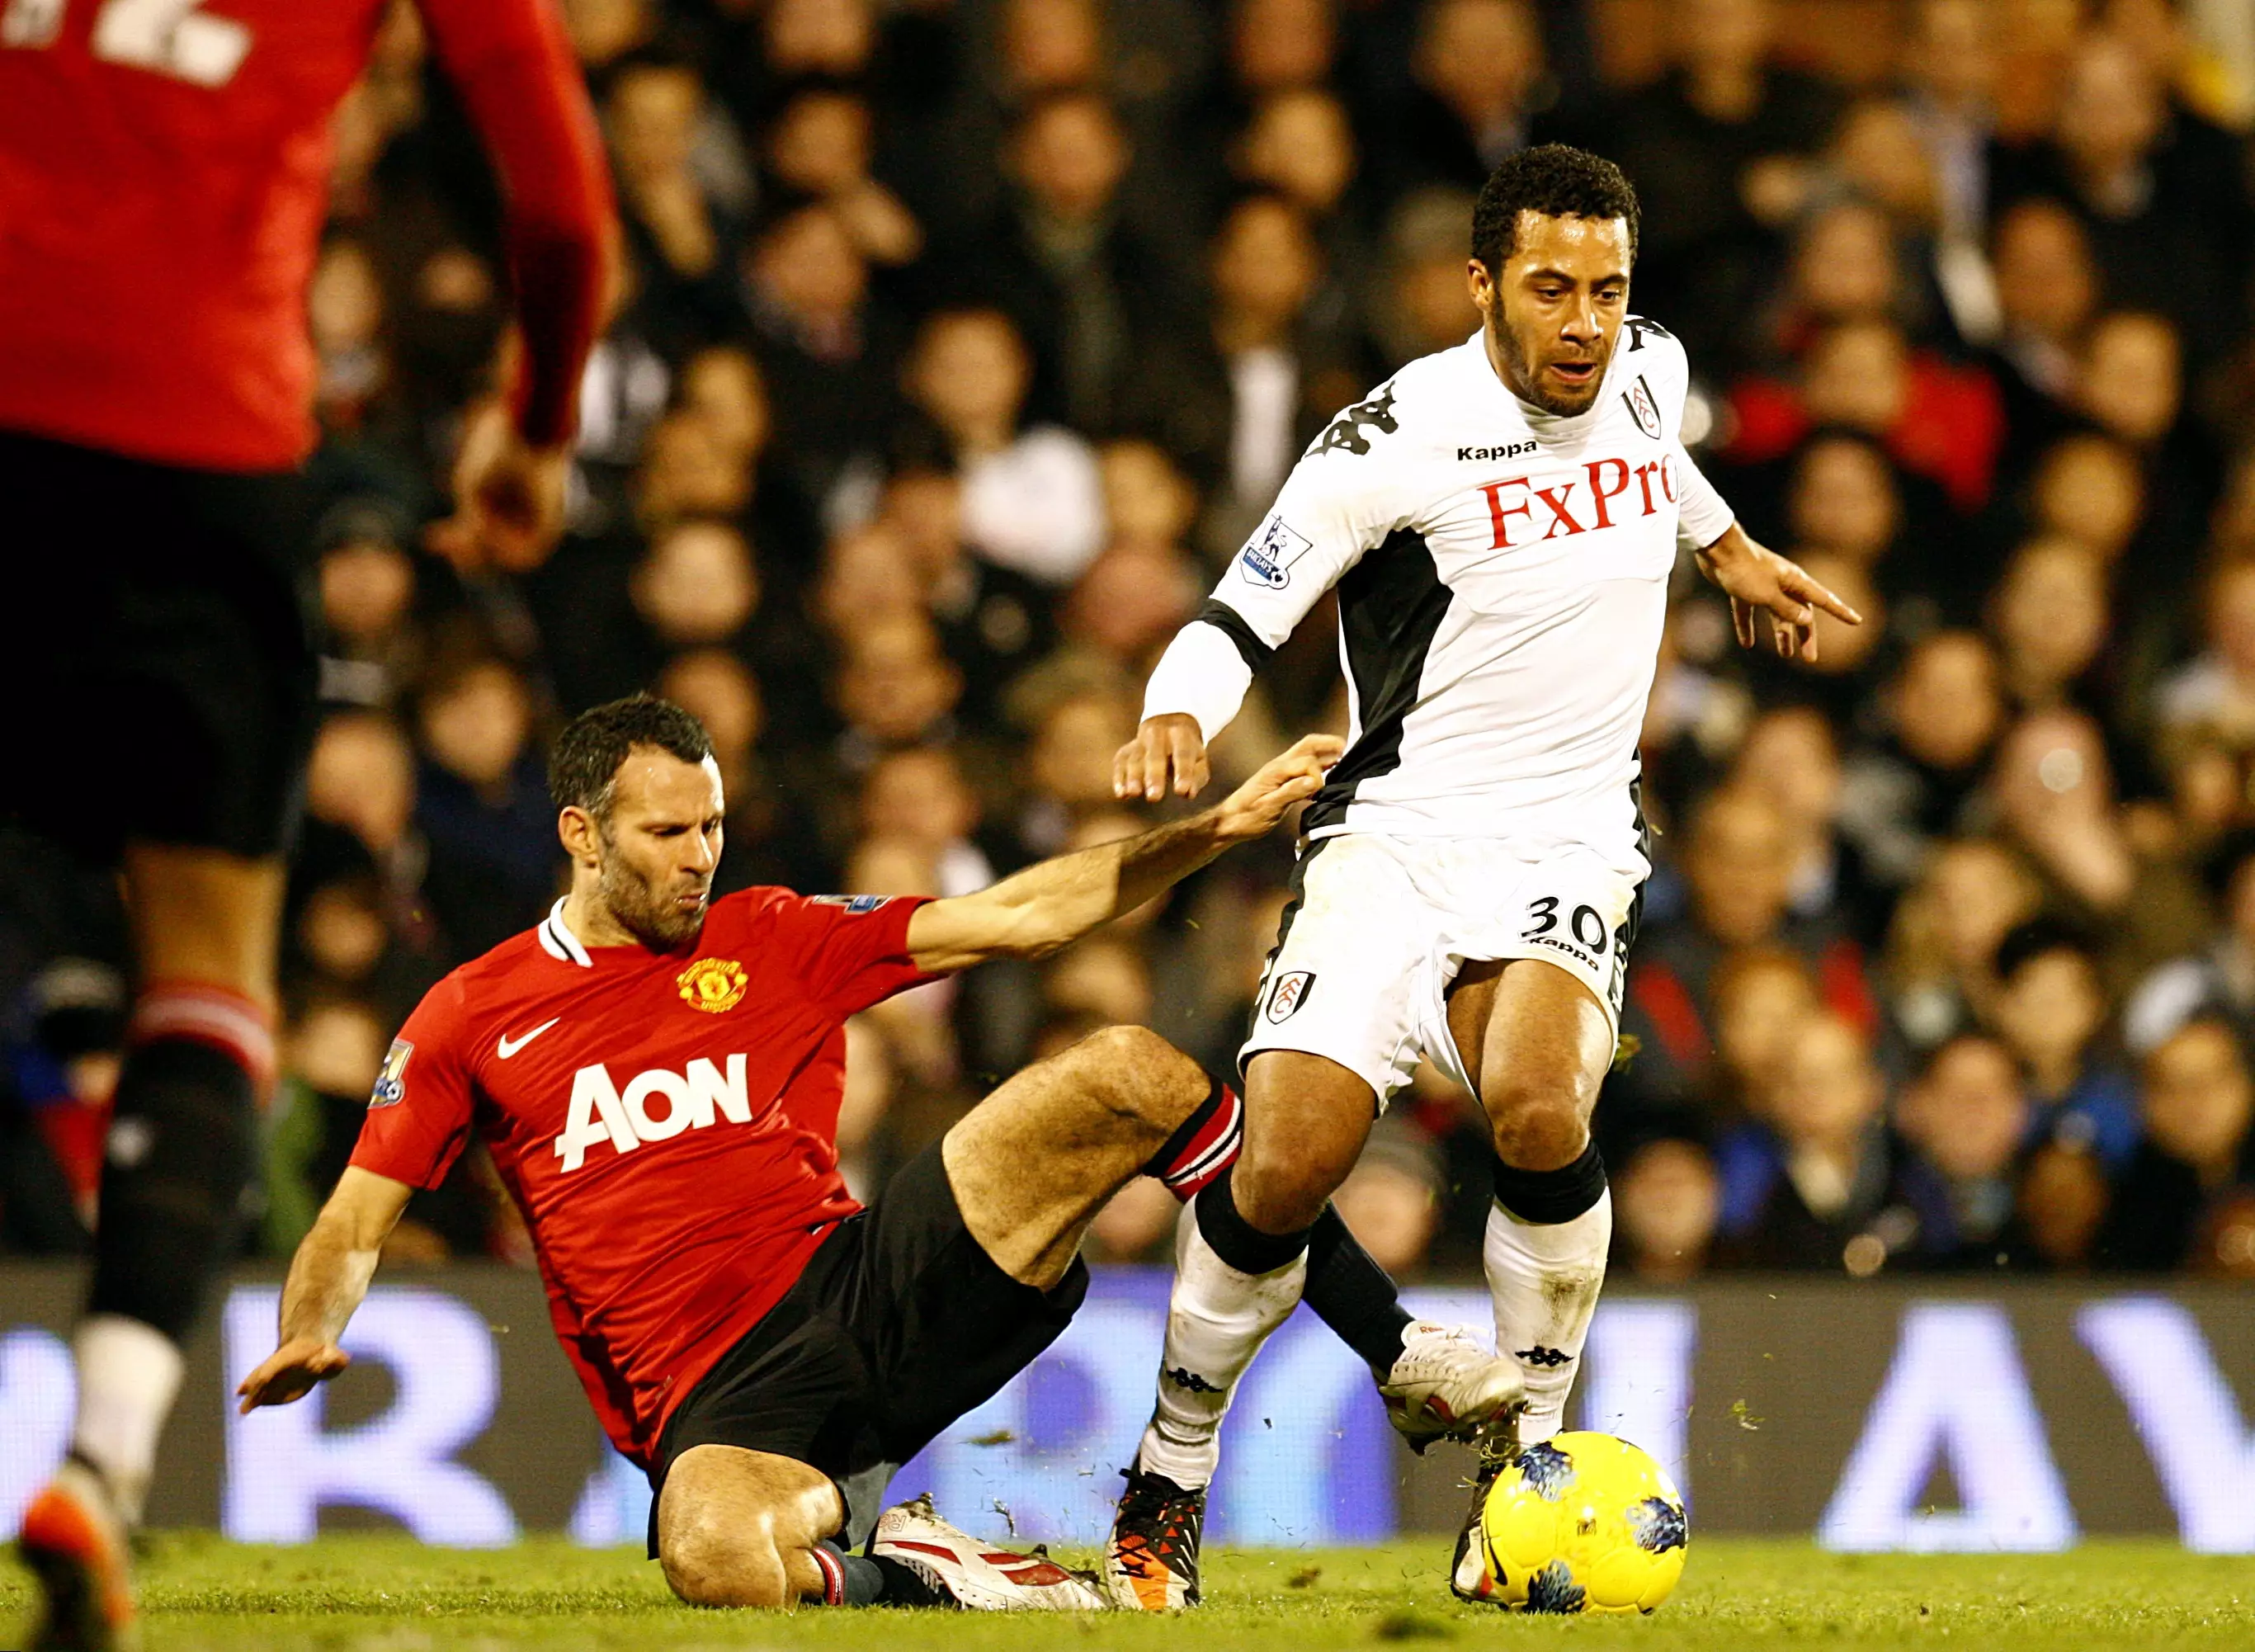 Dembele in action for Fulham against United. Image: PA